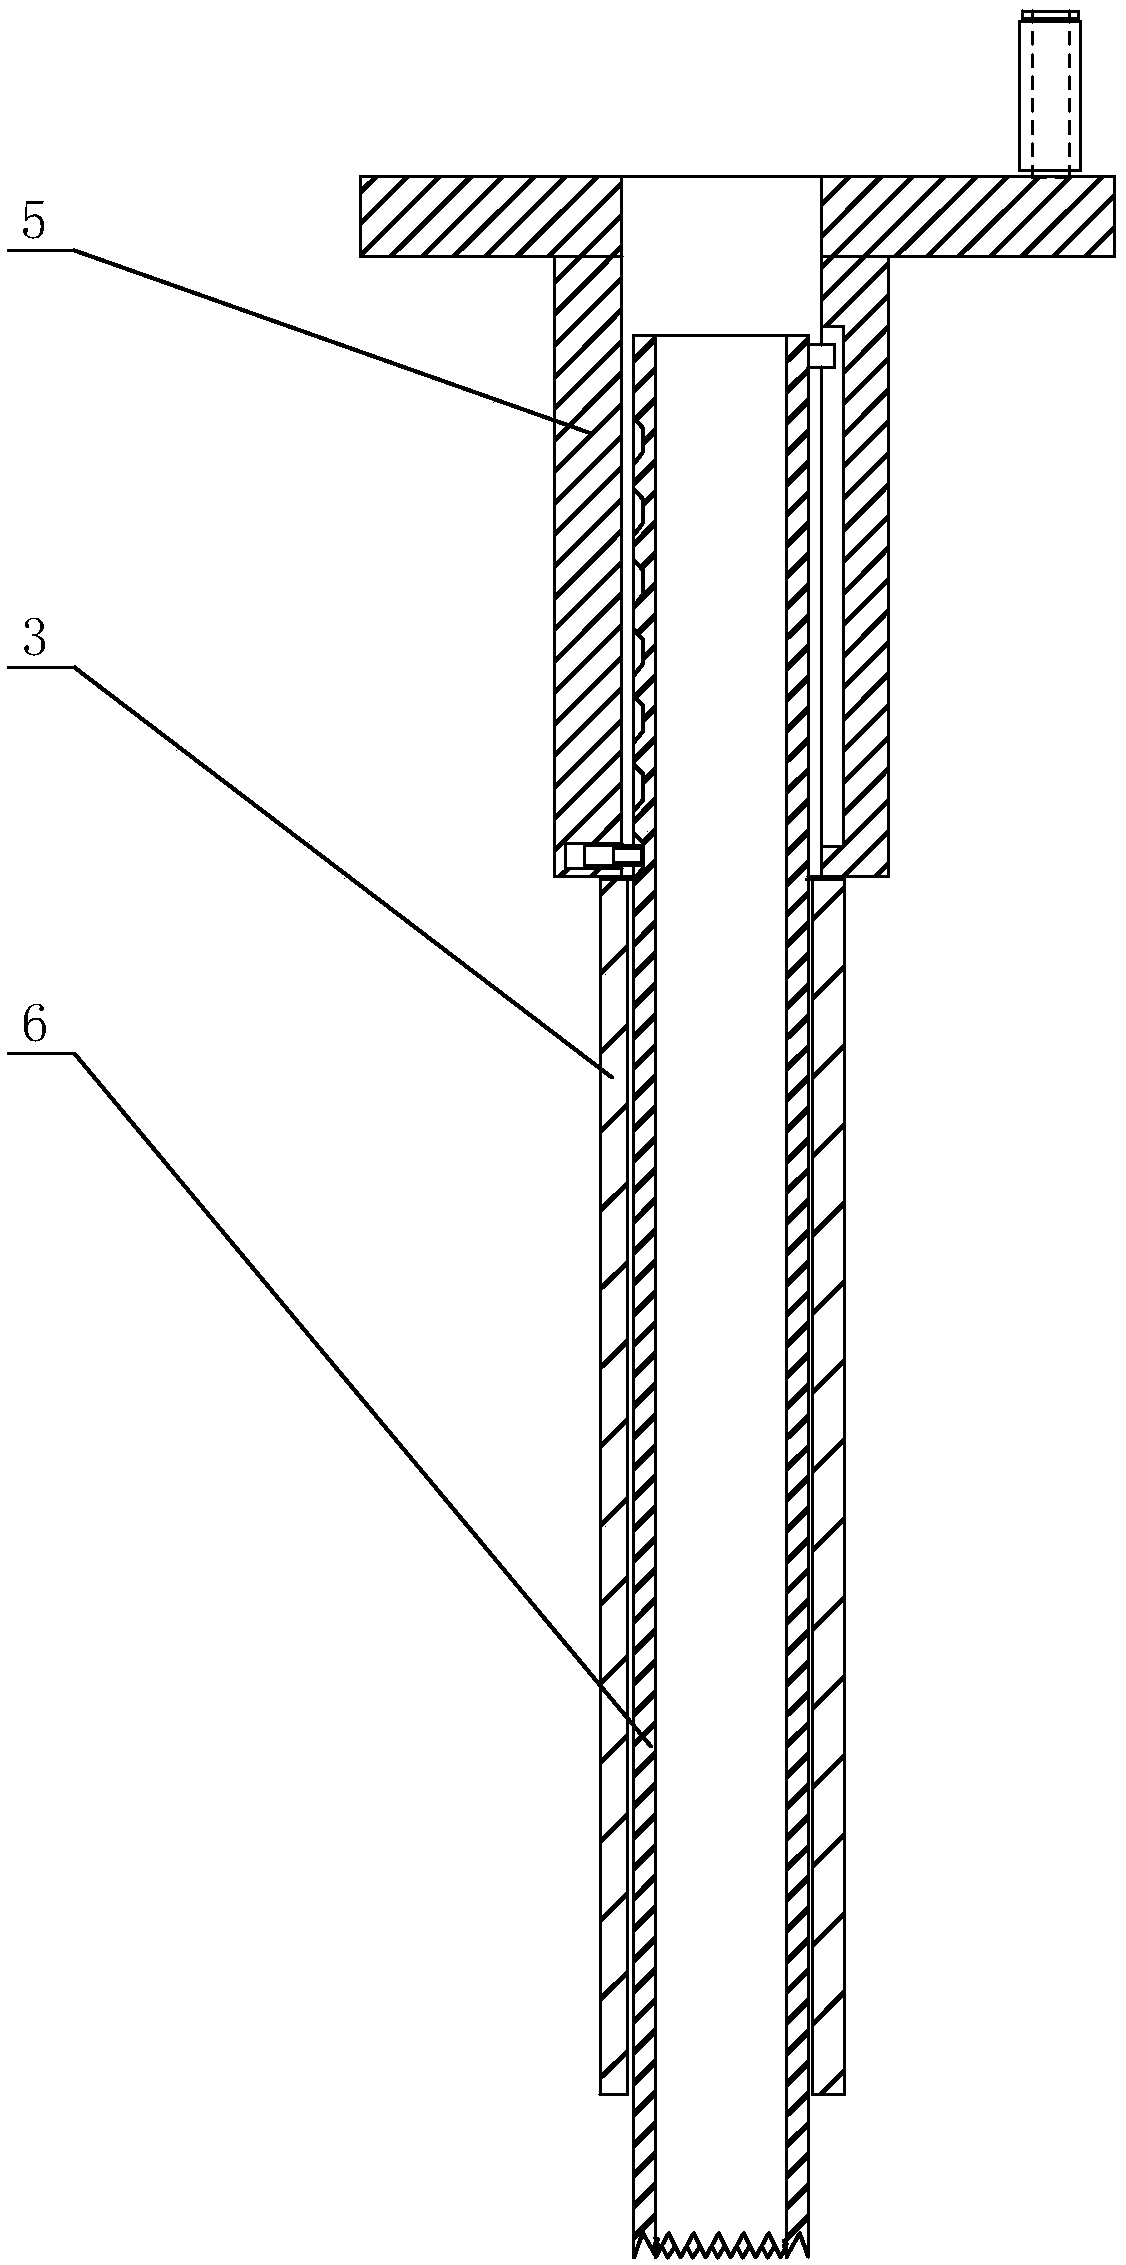 Depth-limit tooth-shaped bone cutter with graduated sleeve for articular process and working method of cutter